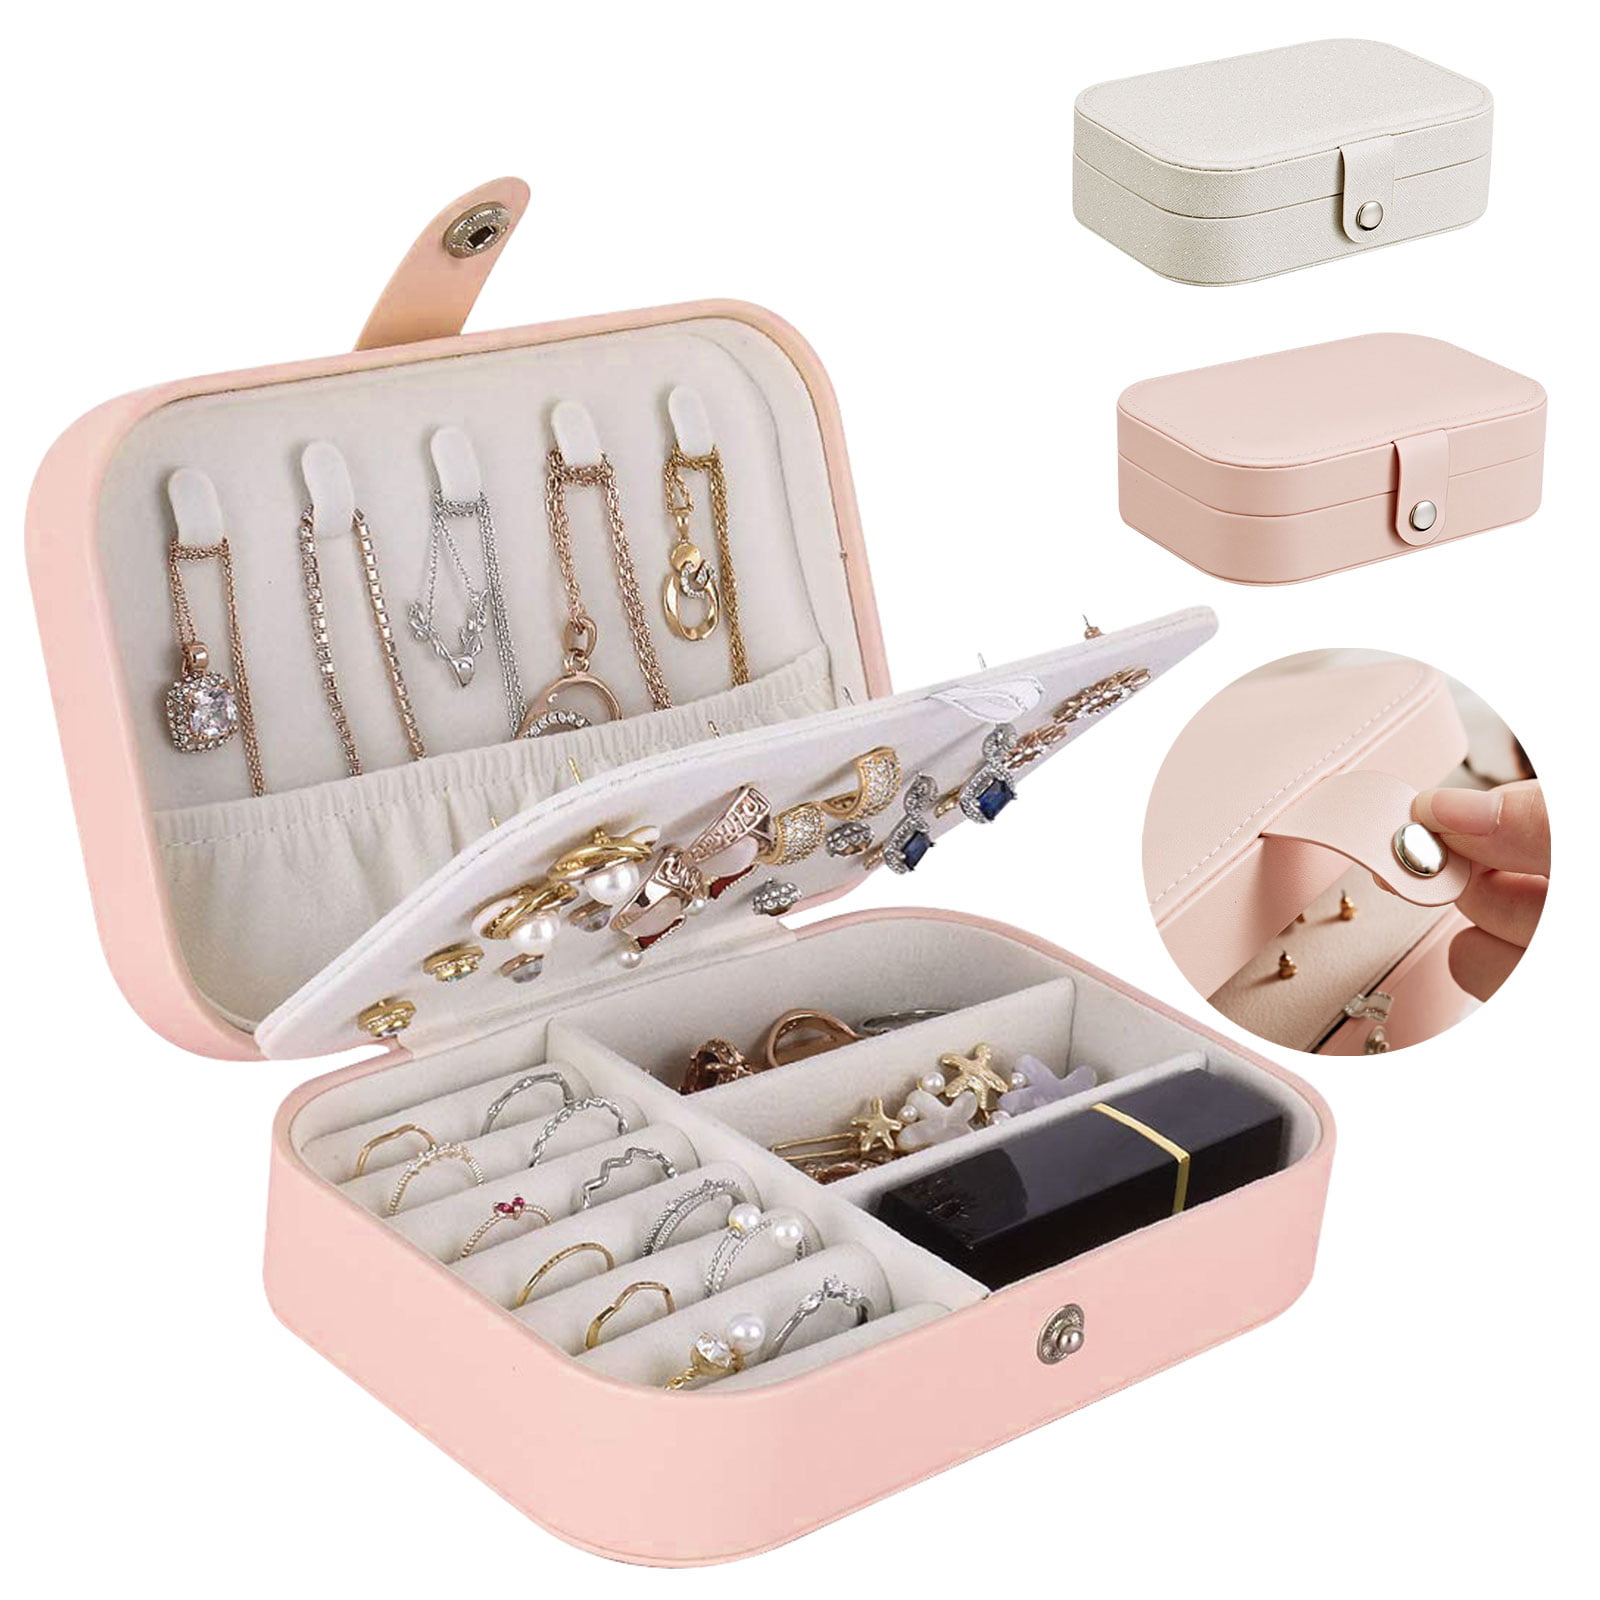 Jewelry Box, Women Portable Travel Jewelry Organizer Box Makeup Cosmetic  Case Storage Bag for Necklace Chain Bracelet Watch Earring Mirror